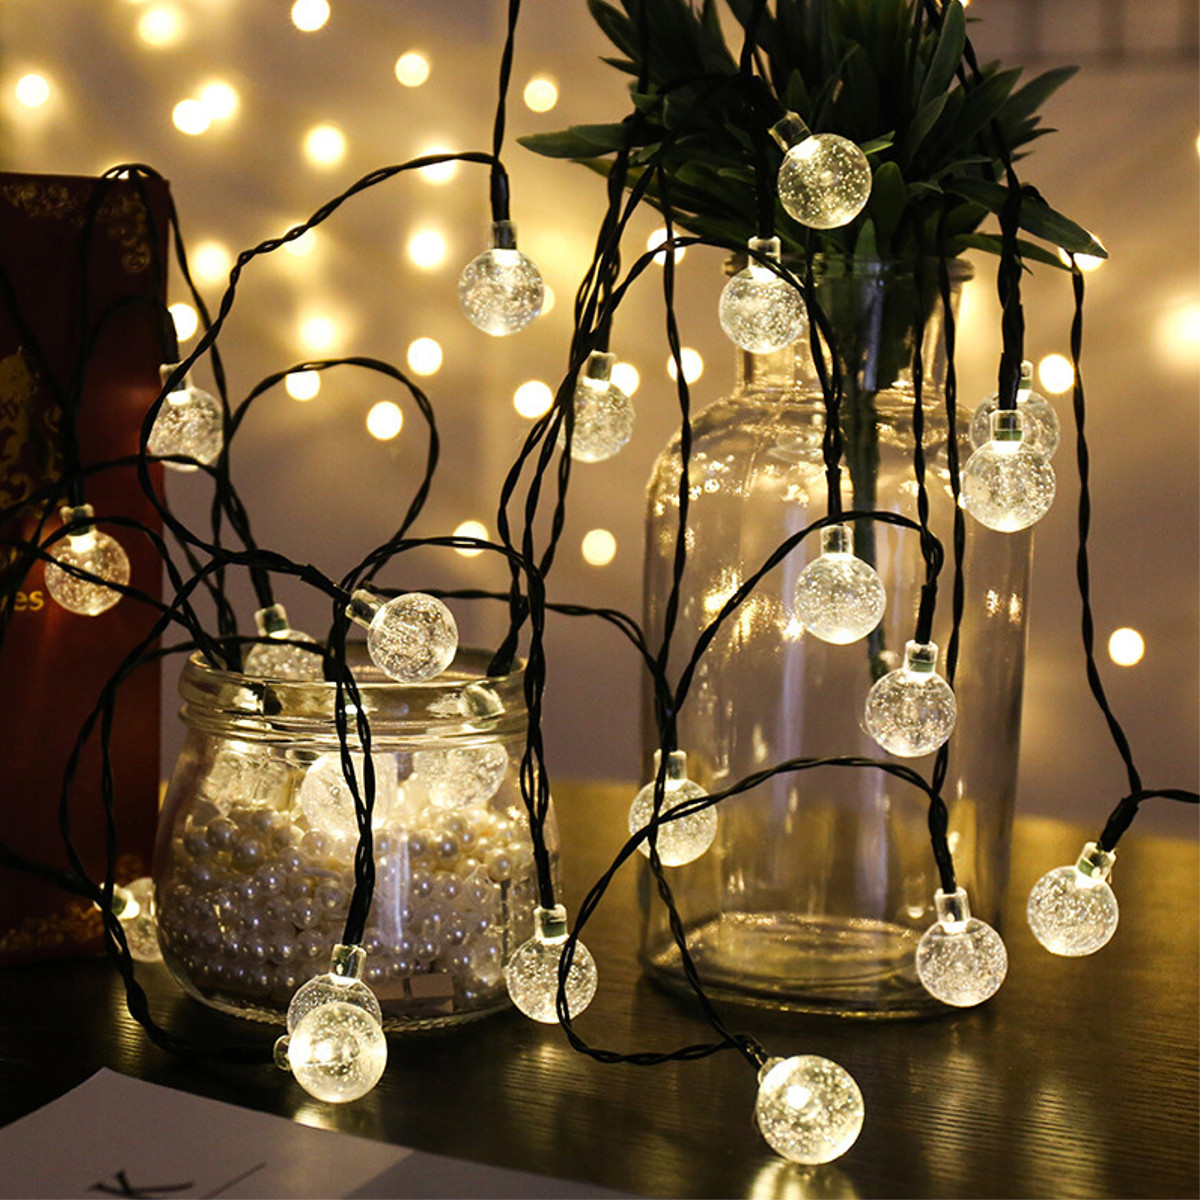 21ft-Solar-Powered-String-Lights-30-Crystal-Balls-Outdoor-Home-LED-Fairy-Lights-Decorations-1605227-3